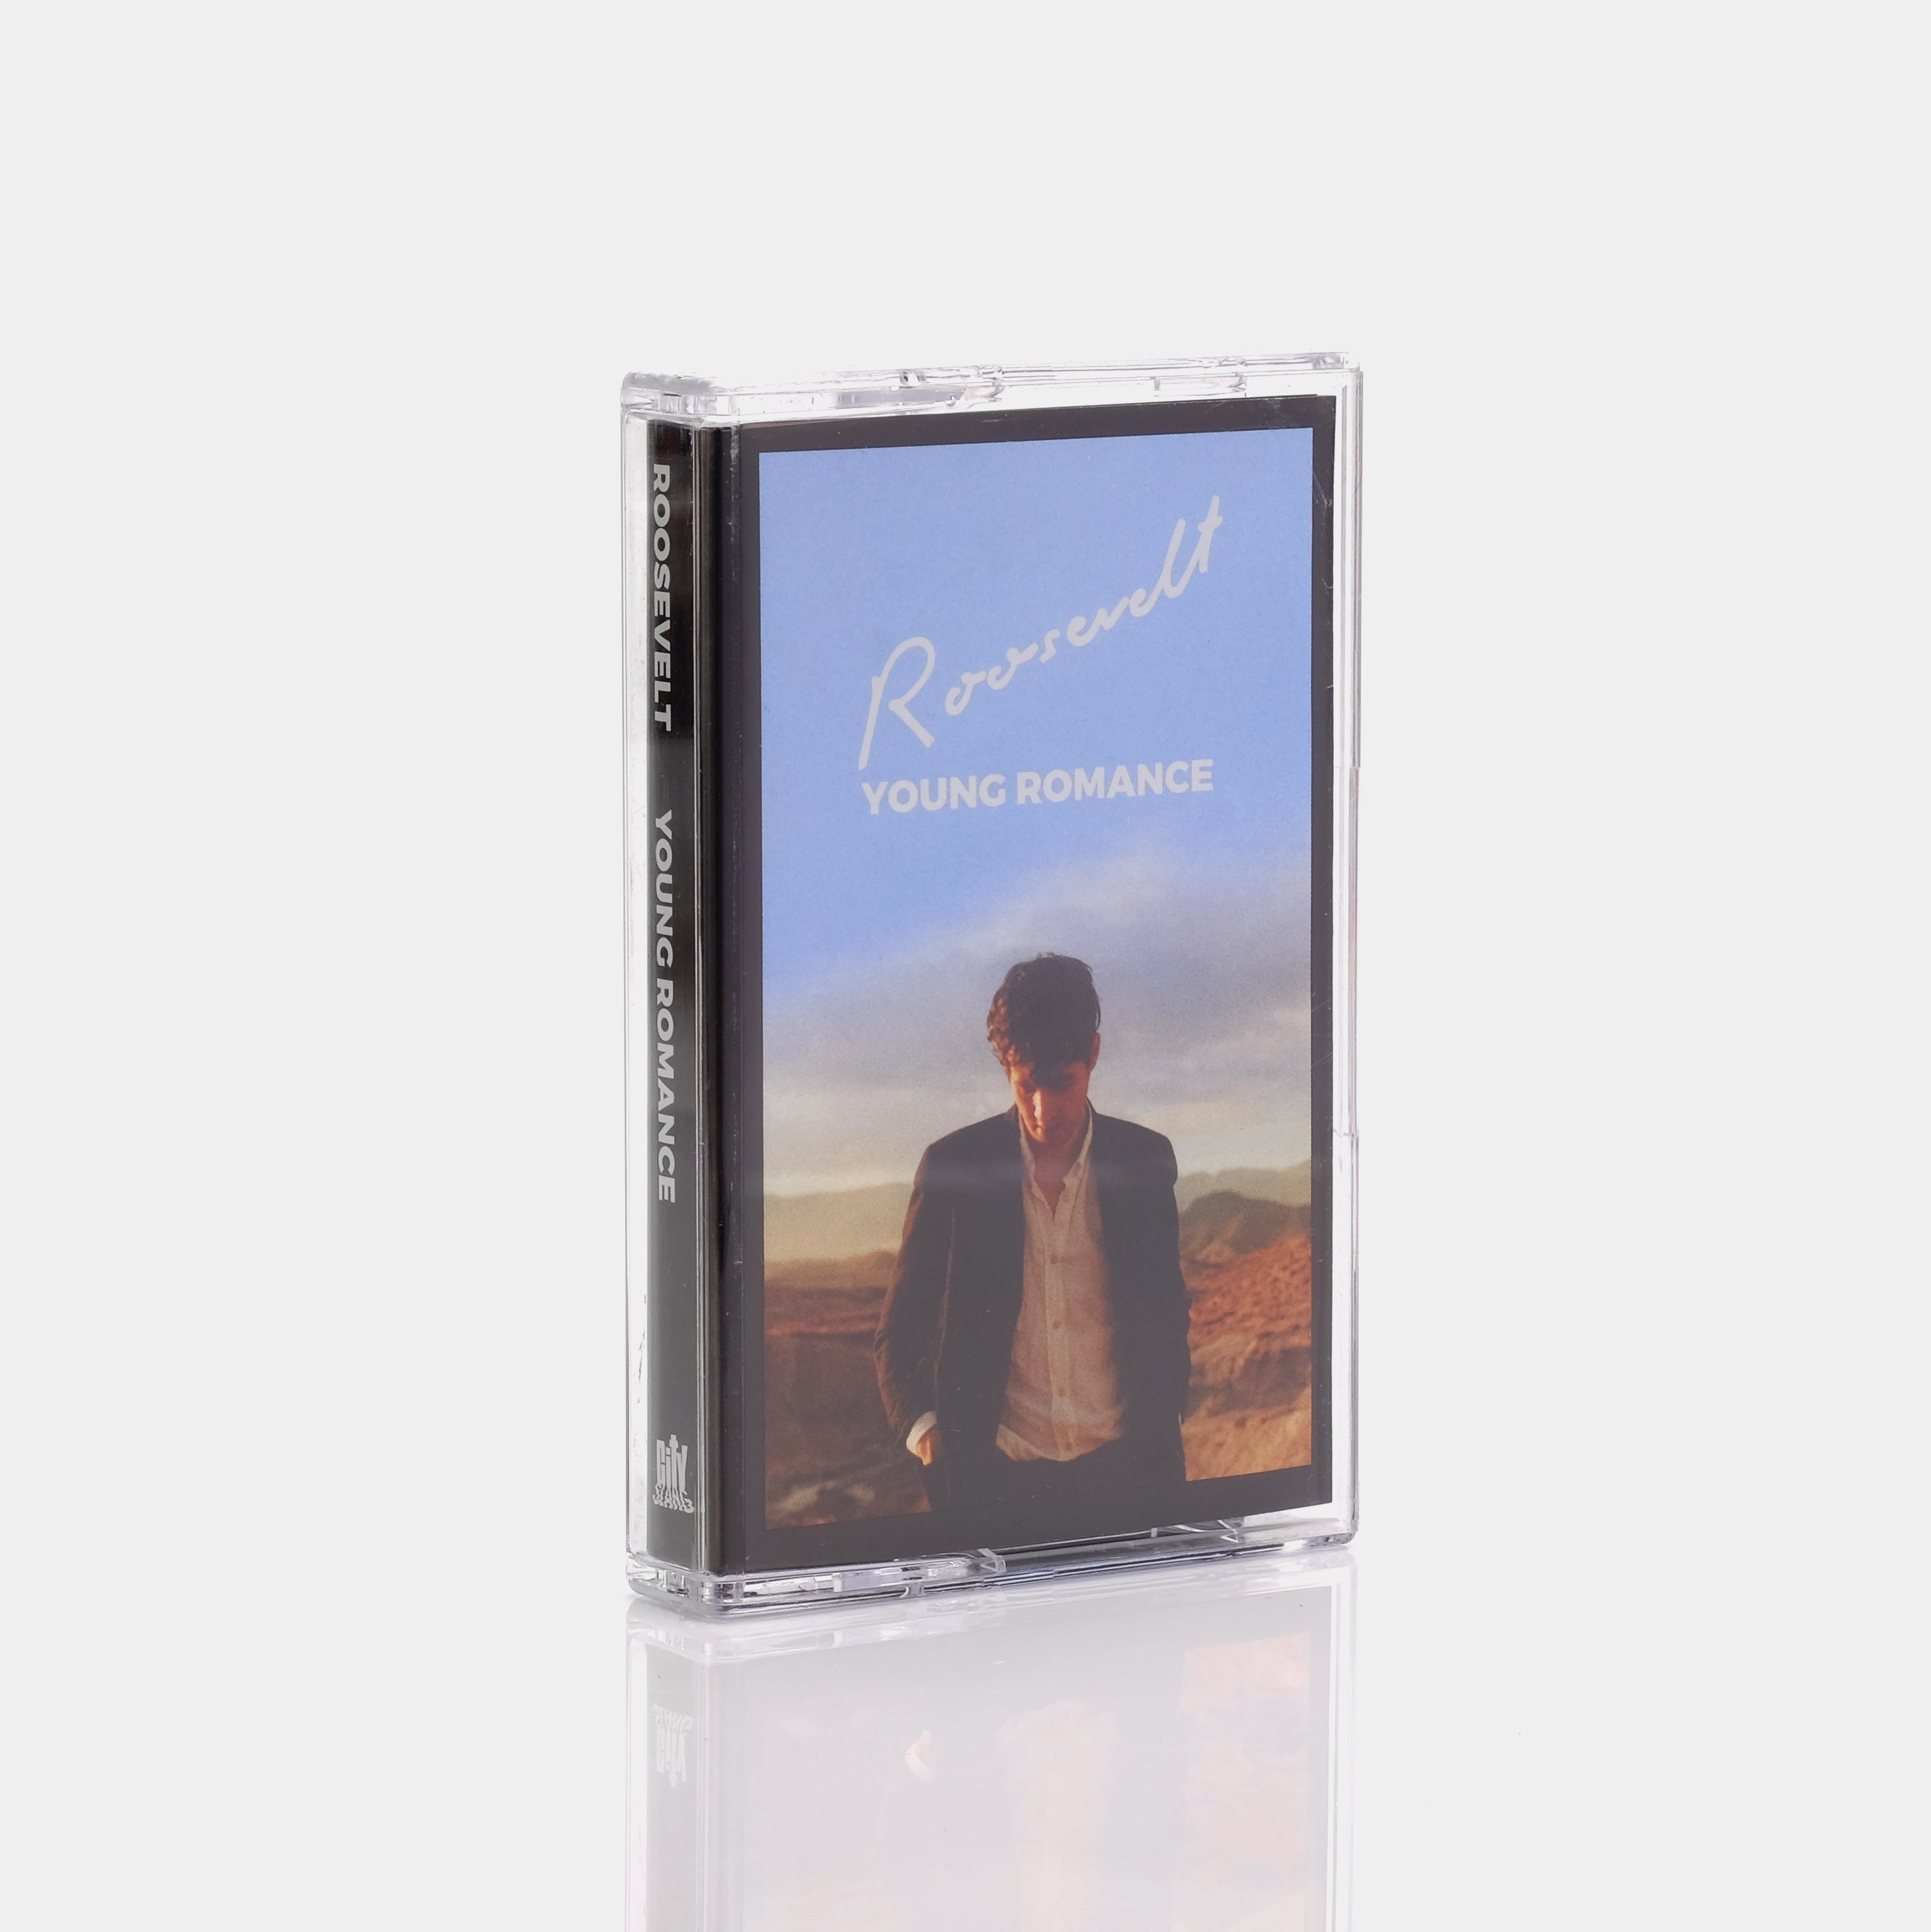 Roosevelt - Young Romance Cassette Tape